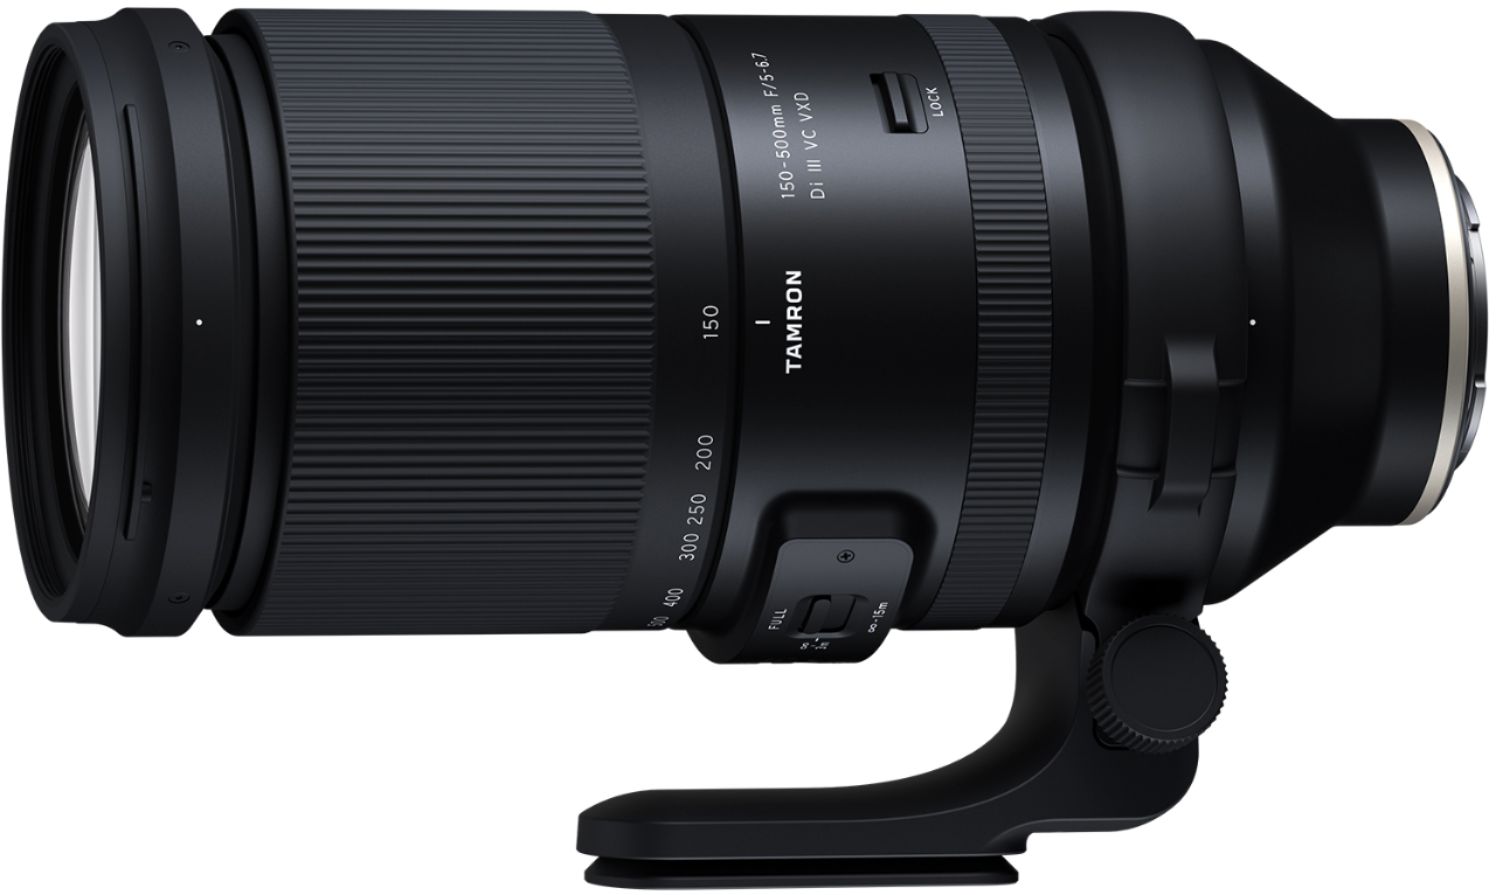 Tamron 150-500mm F/5-6.7 Di III VC VXD Telephoto Zoom Lens for